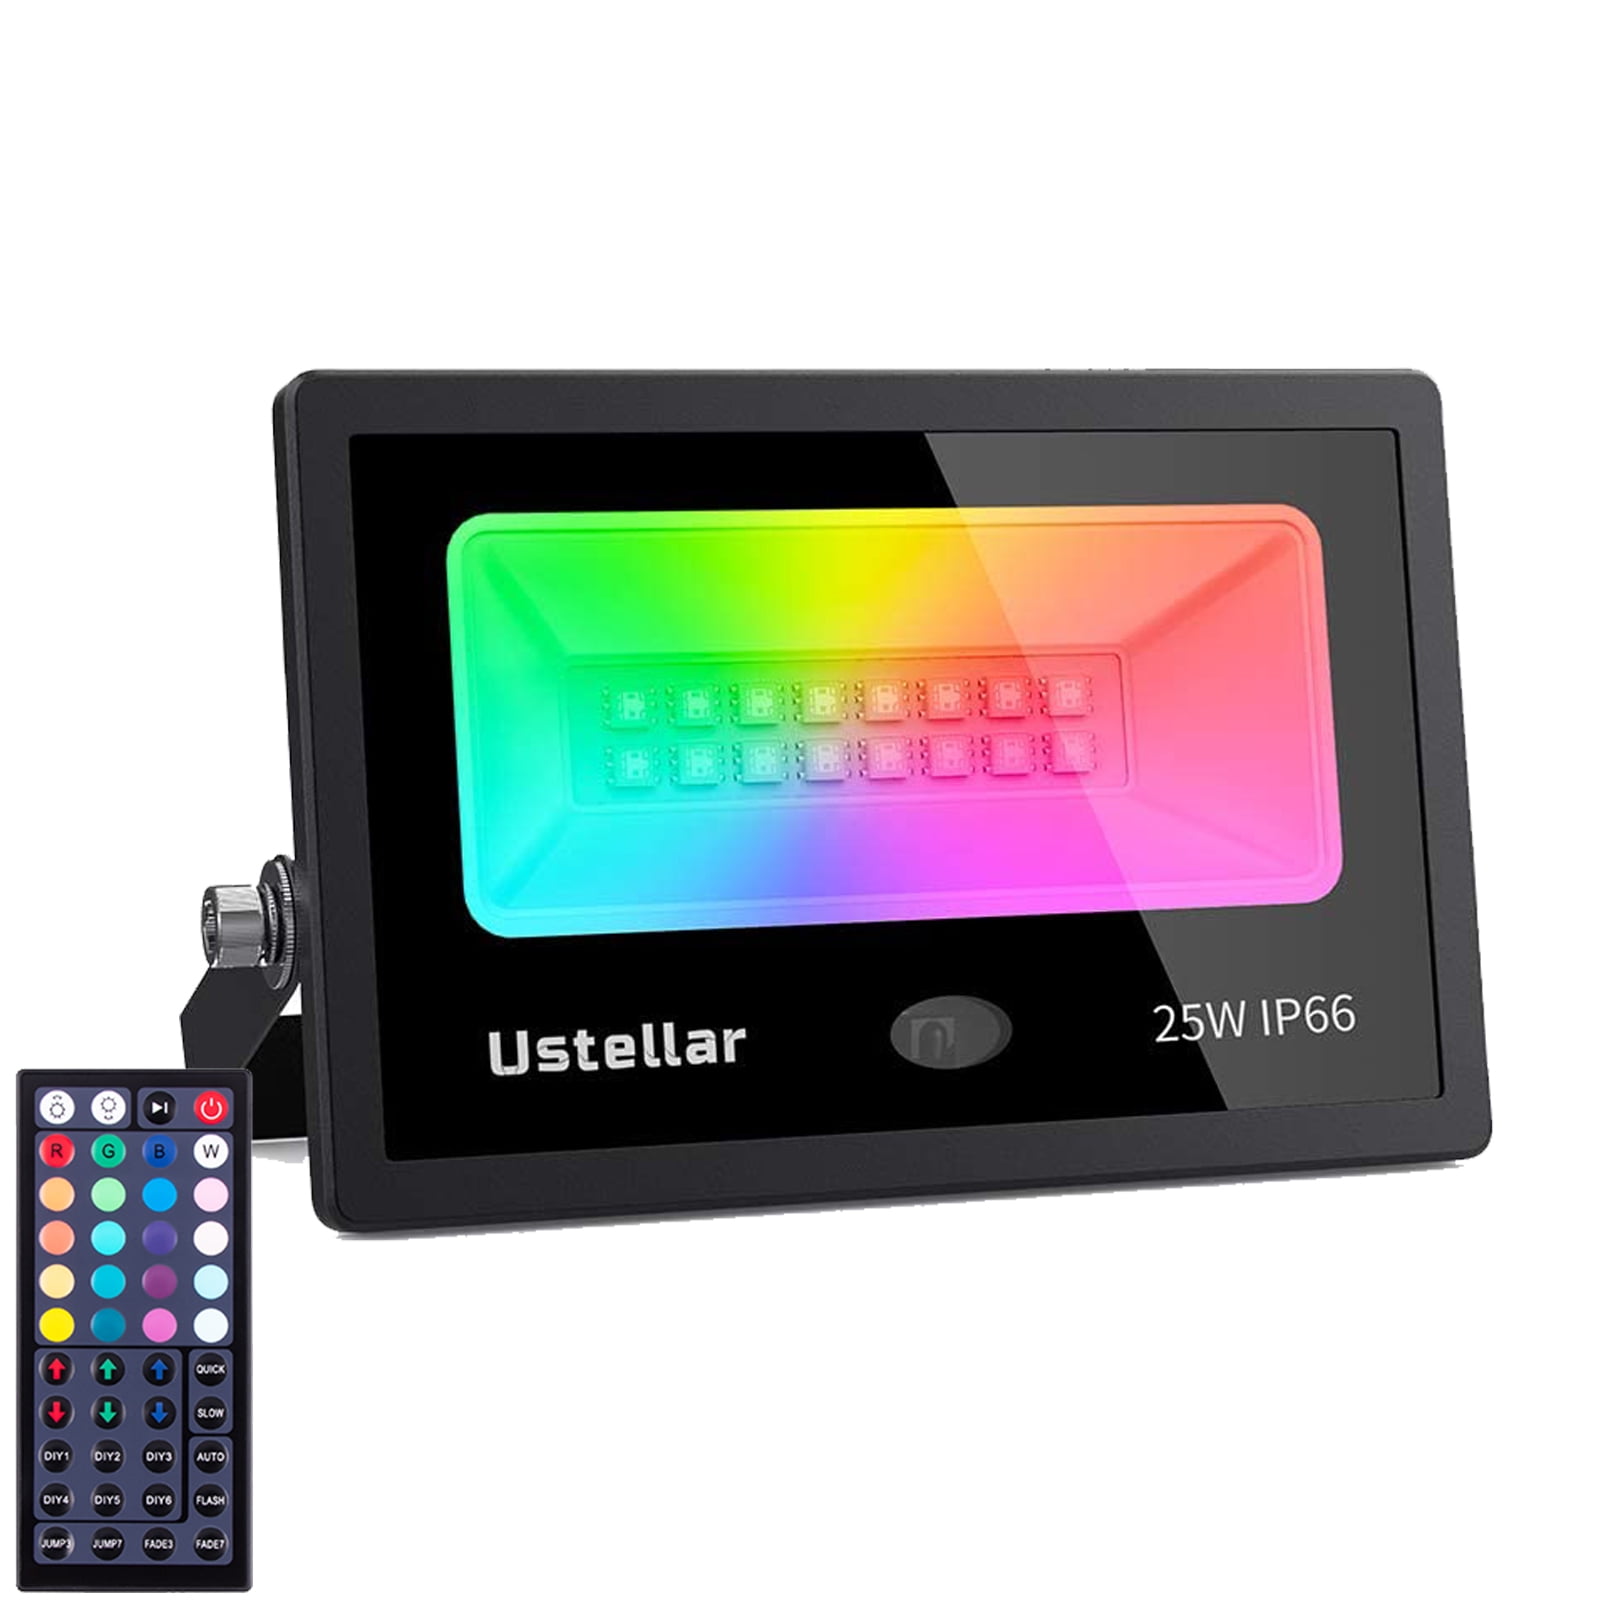 Ustellar 25W RGB LED Flood Light, IP66 Waterproof, Dimmable, Color Changing  Floodlight, Remote Control RGB Spotlight, With Memory Function